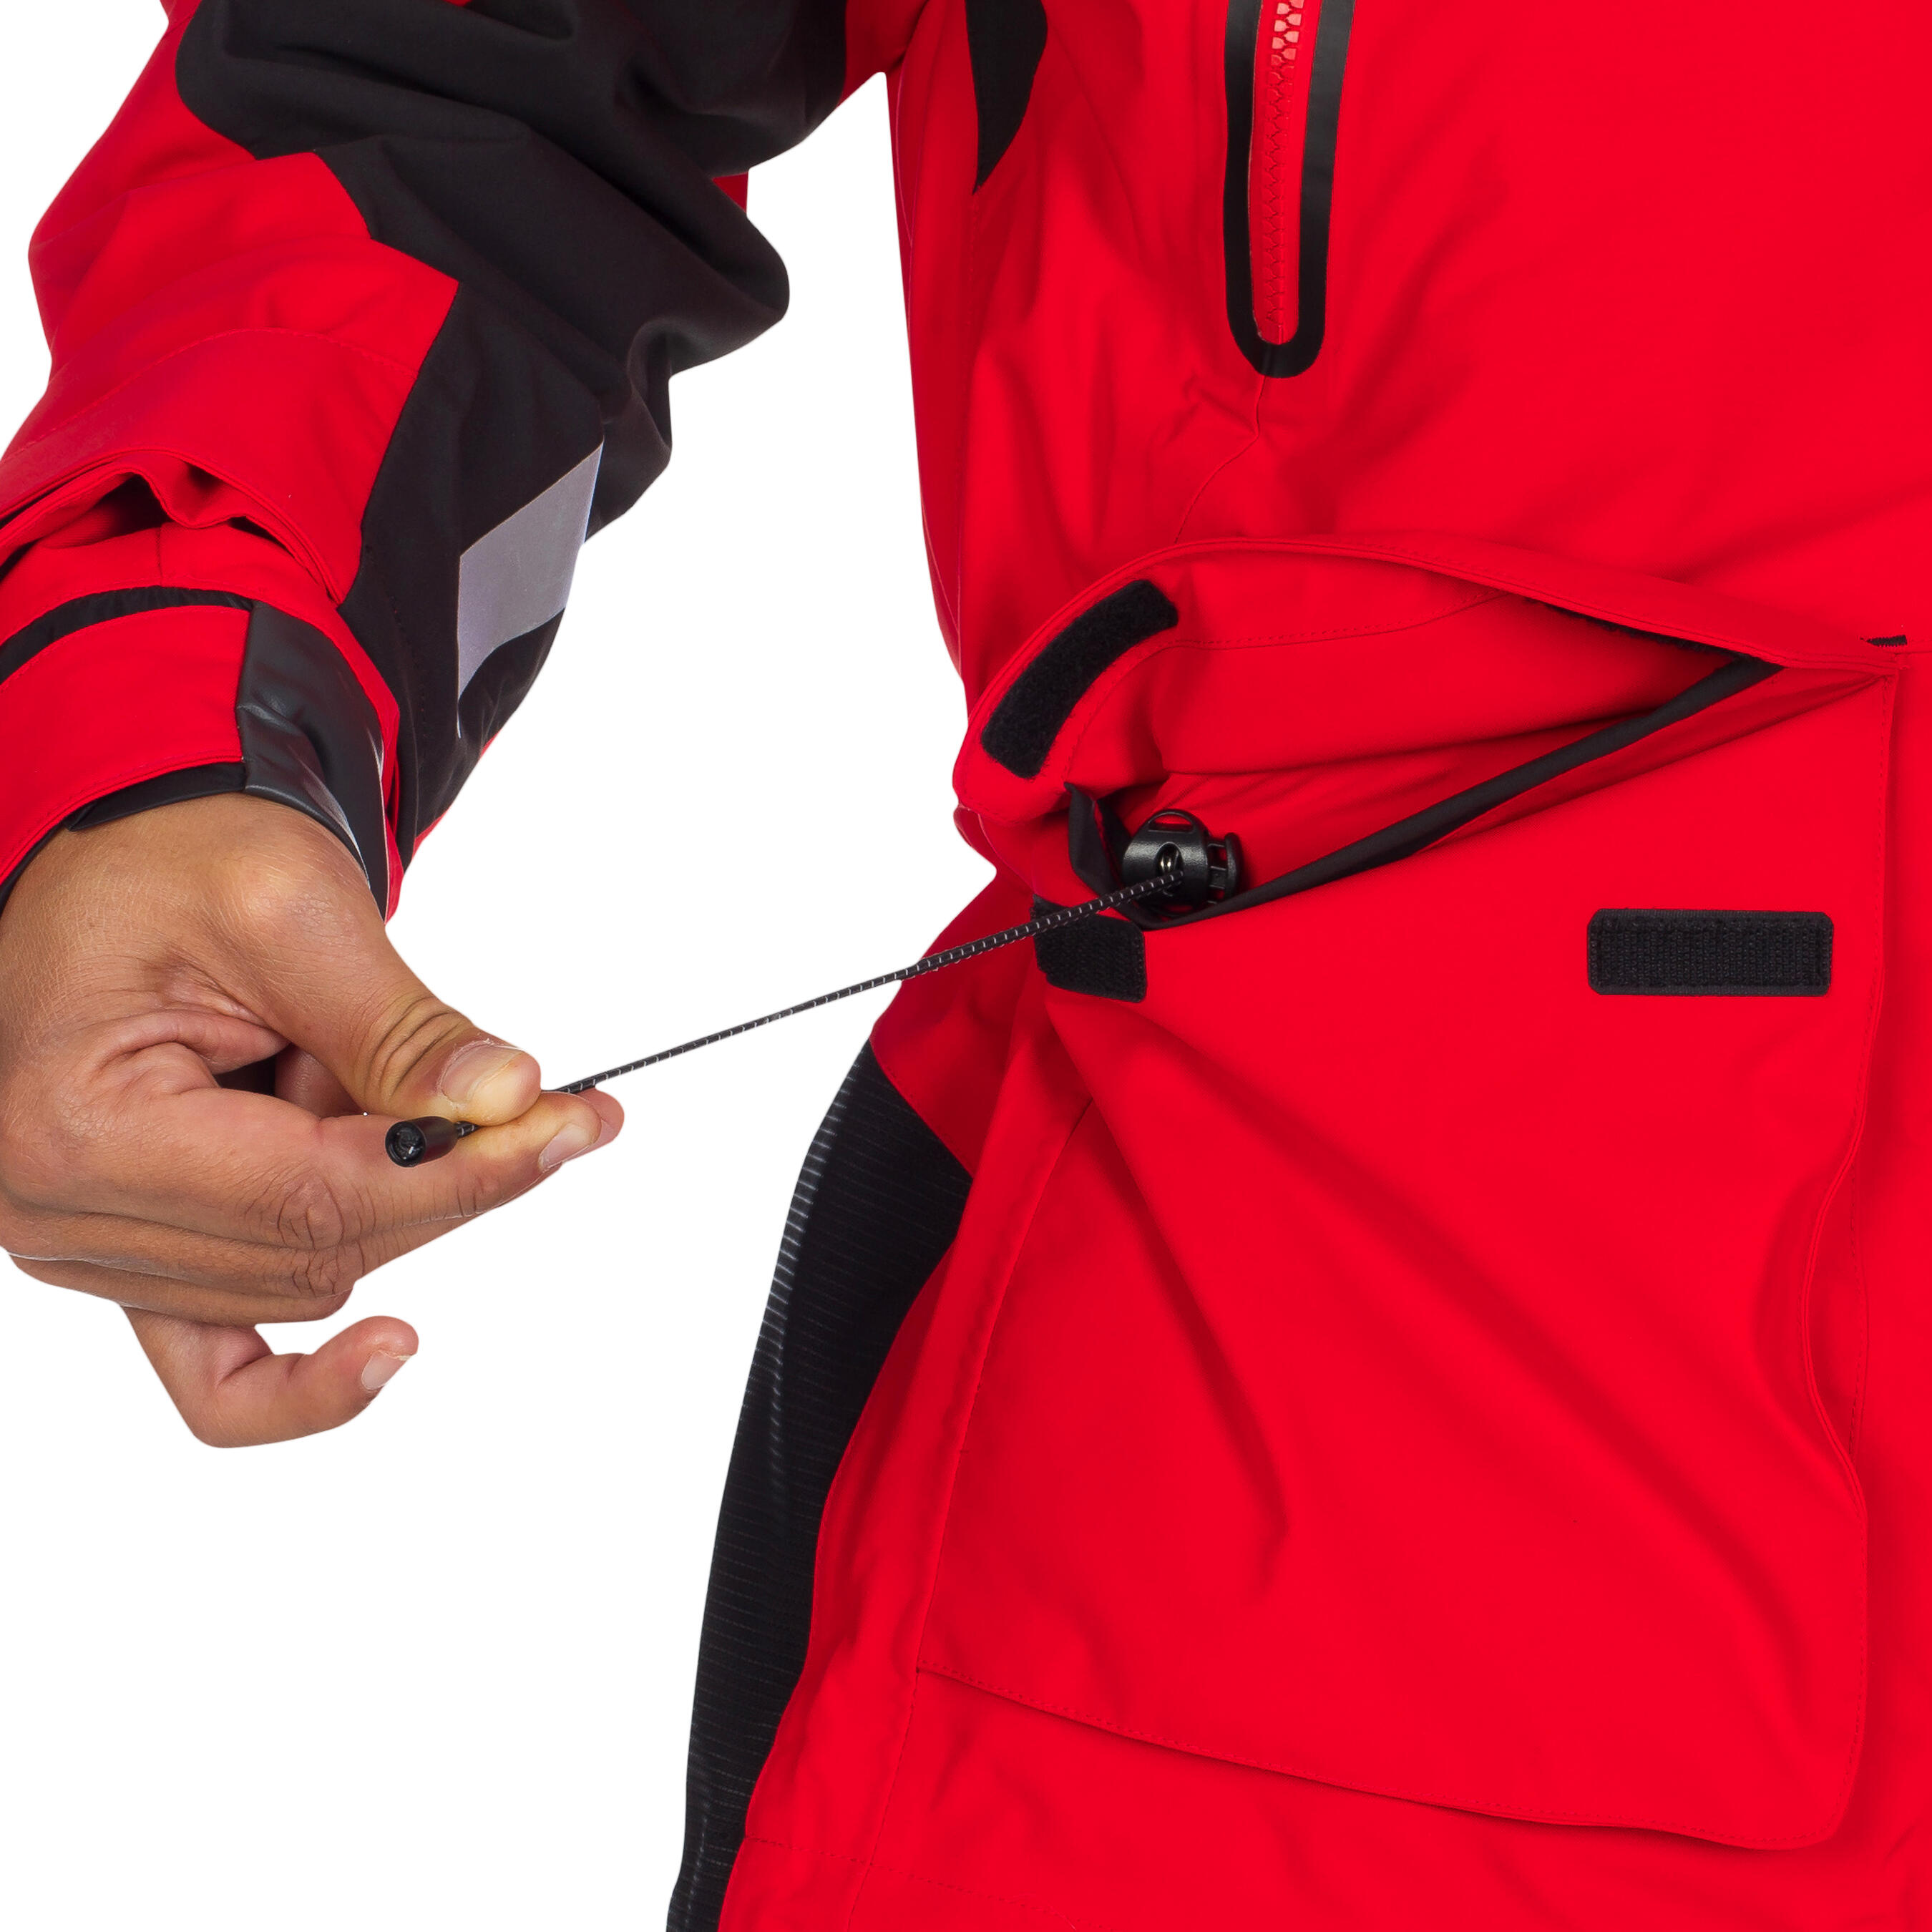 Ozean 900 Men's Waterproof and Breathable Sailing Jacket - Red 22/44